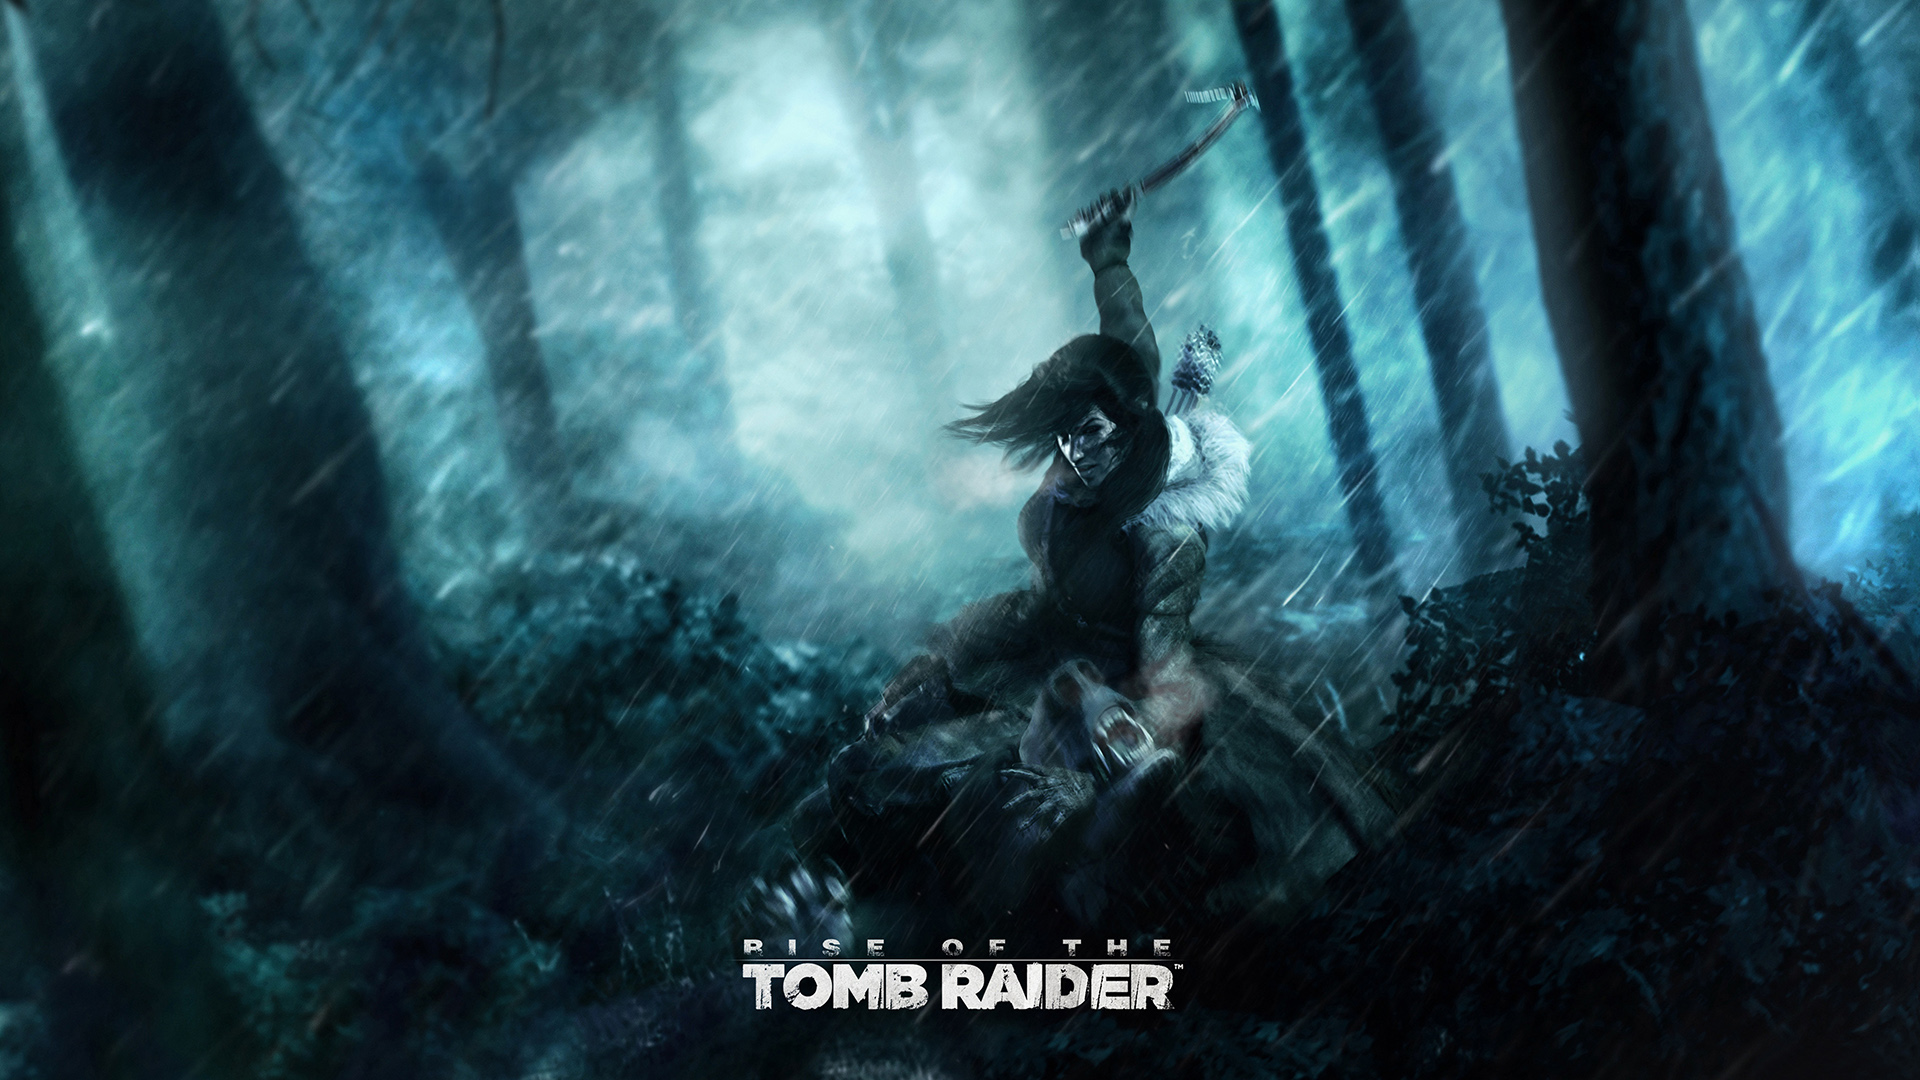  30 2015 By admin Comments Off on Rise of Tomb Raider Wallpaper HD